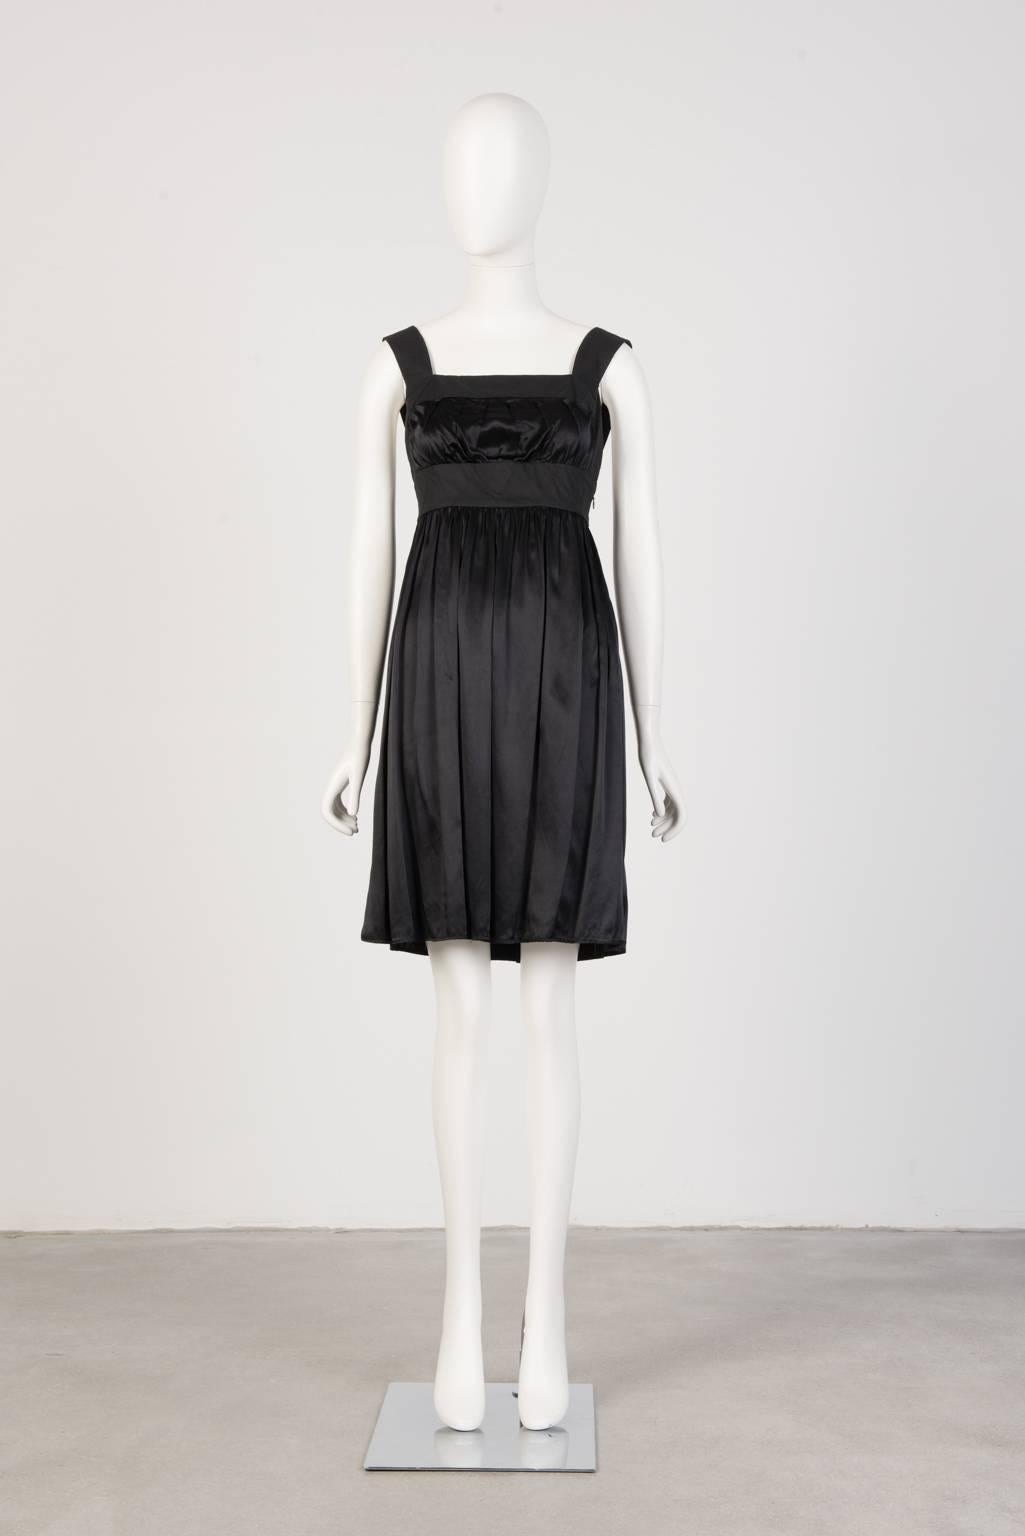 Black, open back, knee length dress in satin-like viscose with empire waist, pleated skirt and cotton-edged bodice and straps.